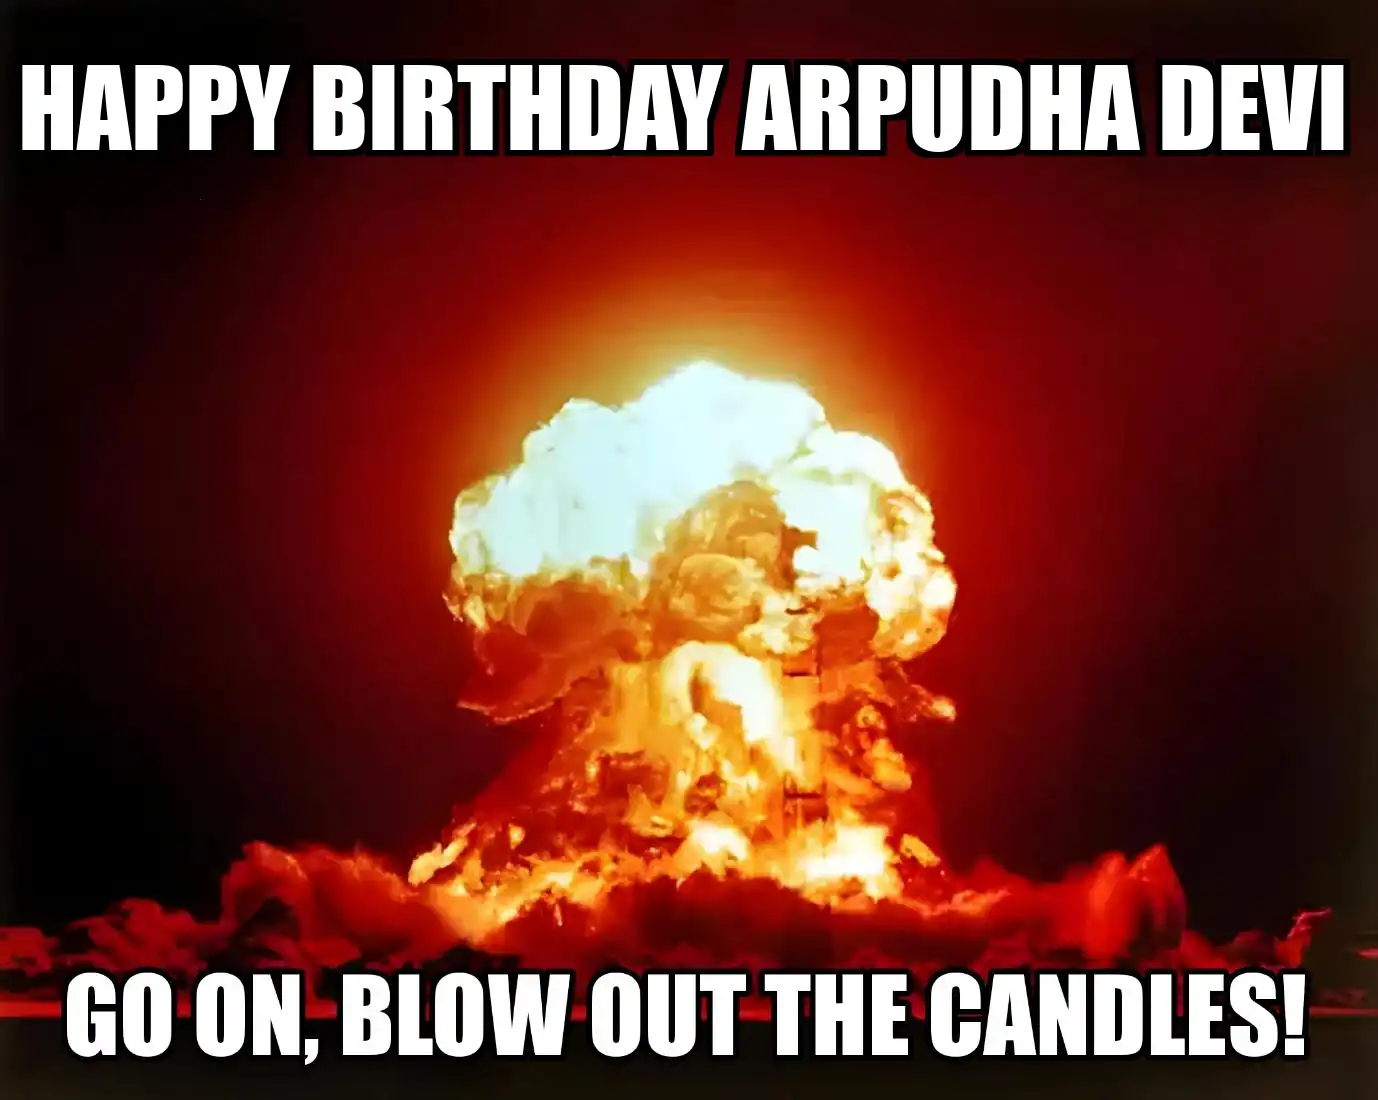 Happy Birthday Arpudha devi Go On Blow Out The Candles Meme